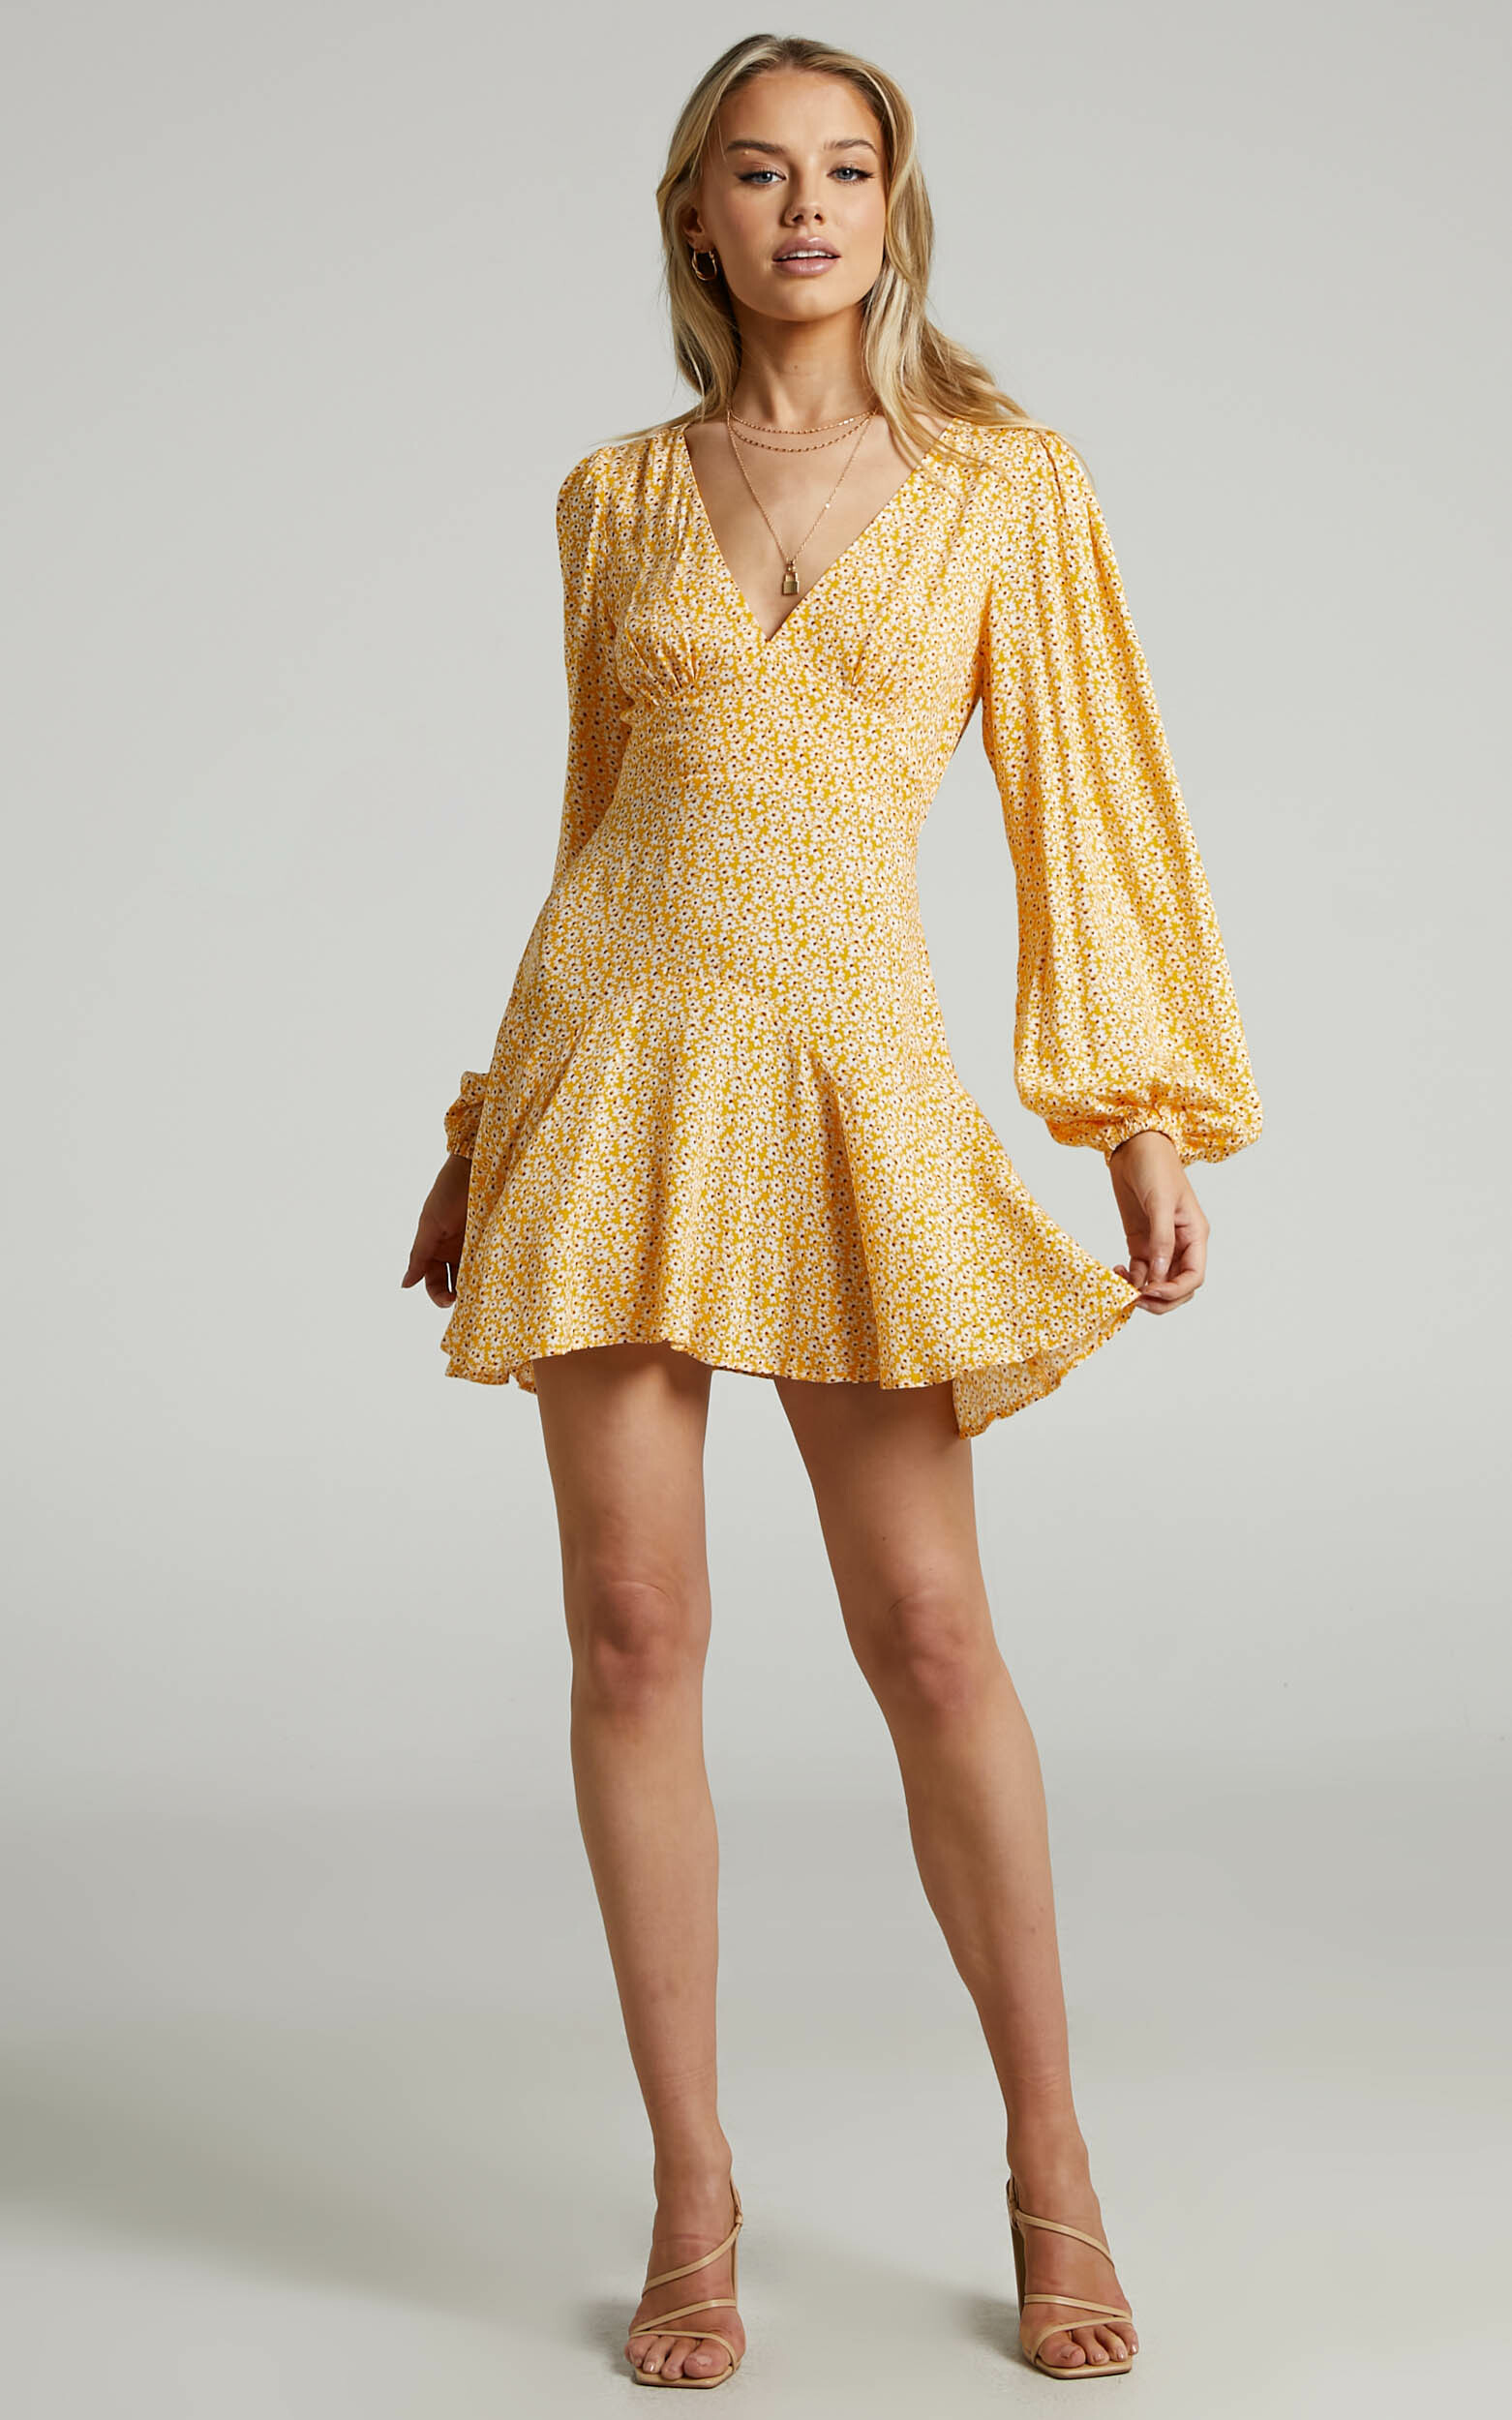 Riecha Long Sleeve Mini Dress in Yellow Floral - 04, YEL1, hi-res image number null